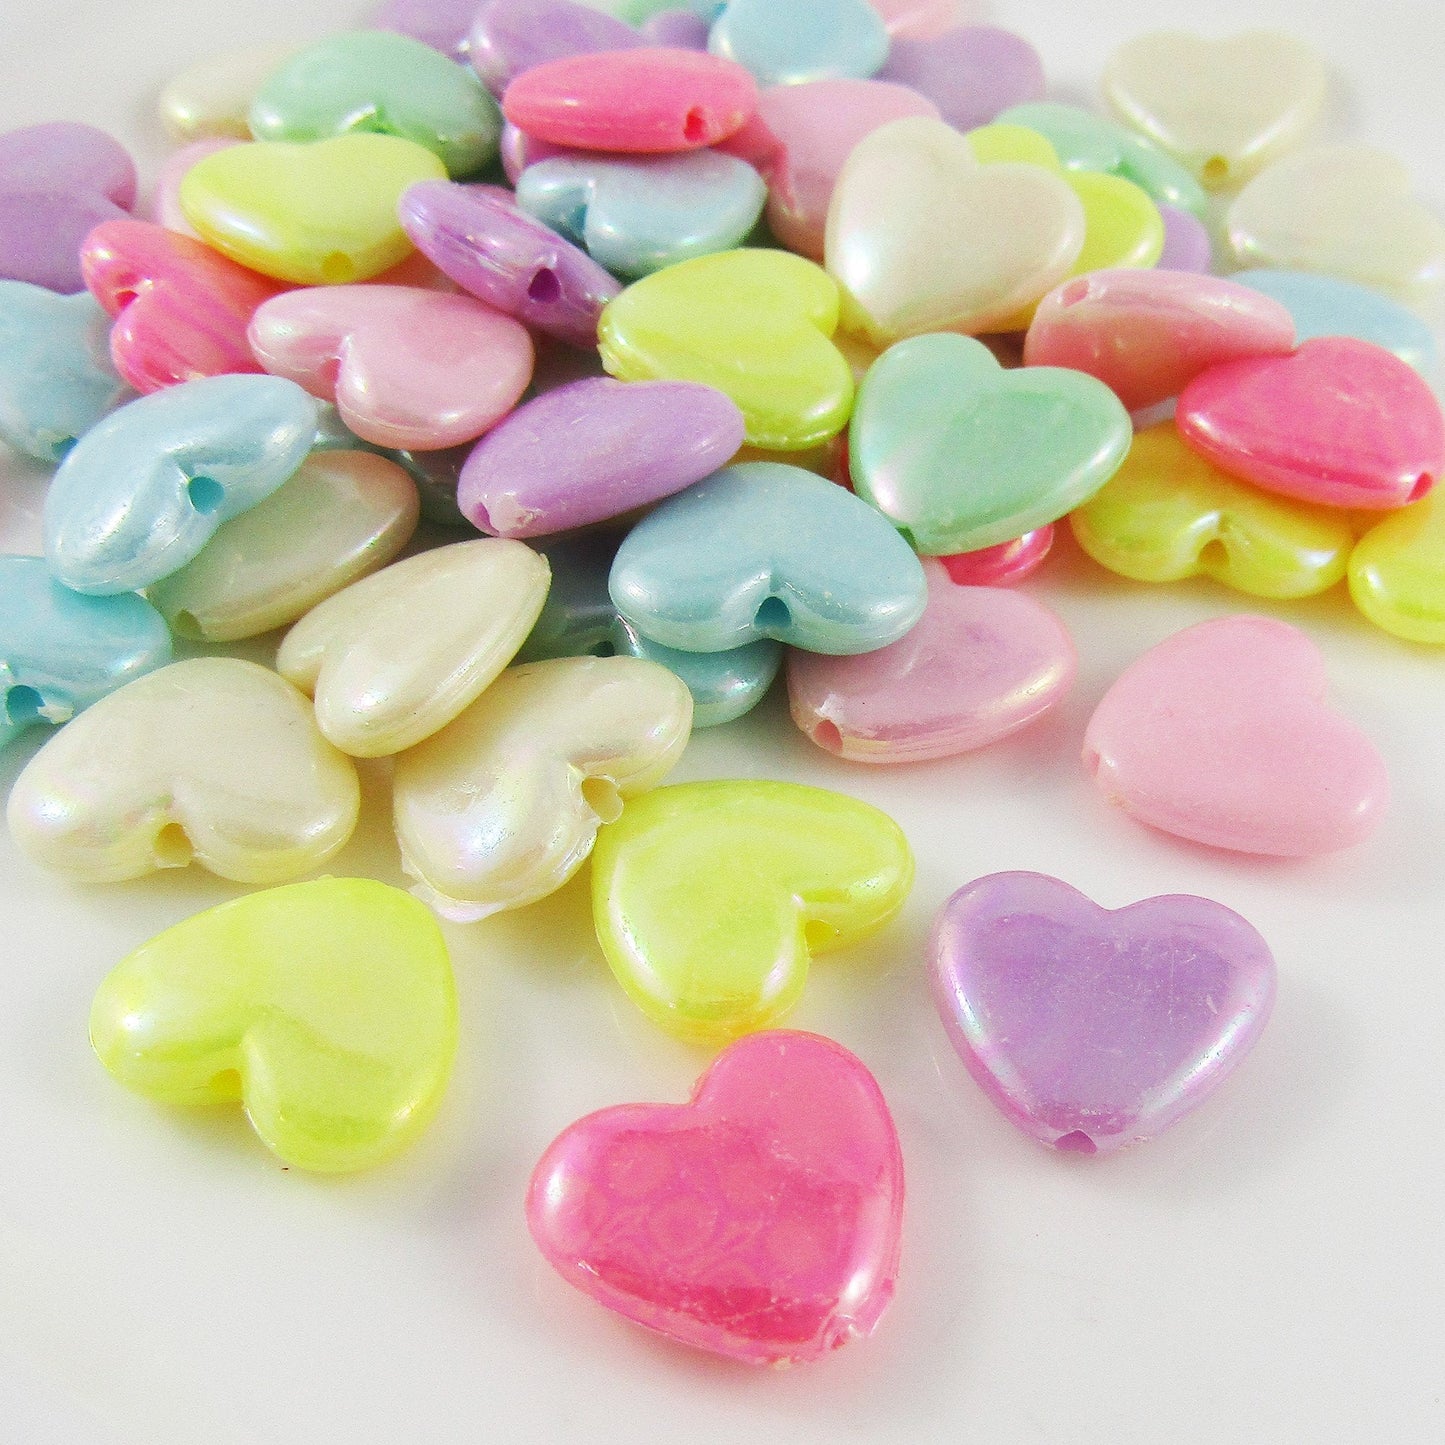 50g 80+pcs Opaque Acrylic Love Heart Craft Beads Mixed Pastel 14x15mm Hole 1.5mm